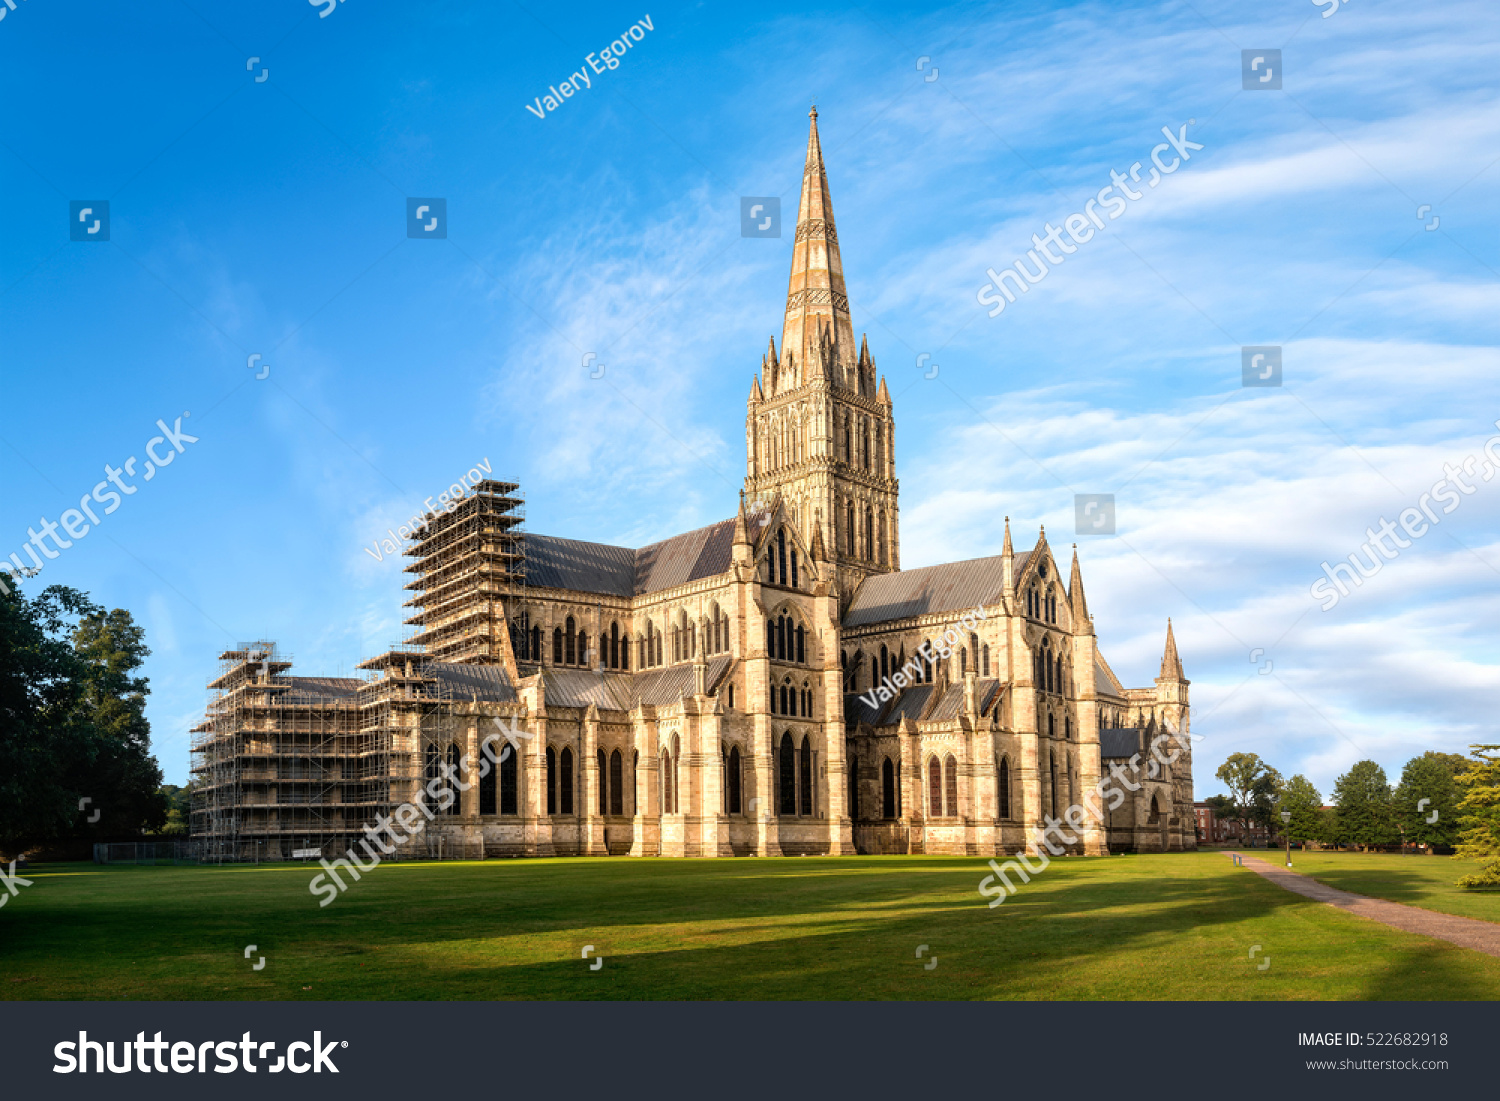 View of Salisbury cathedral church of the Blessed Virgin Mary at sunrise from East. The building is superb example of early english gothic architecture.Copy space in blue sky. #522682918